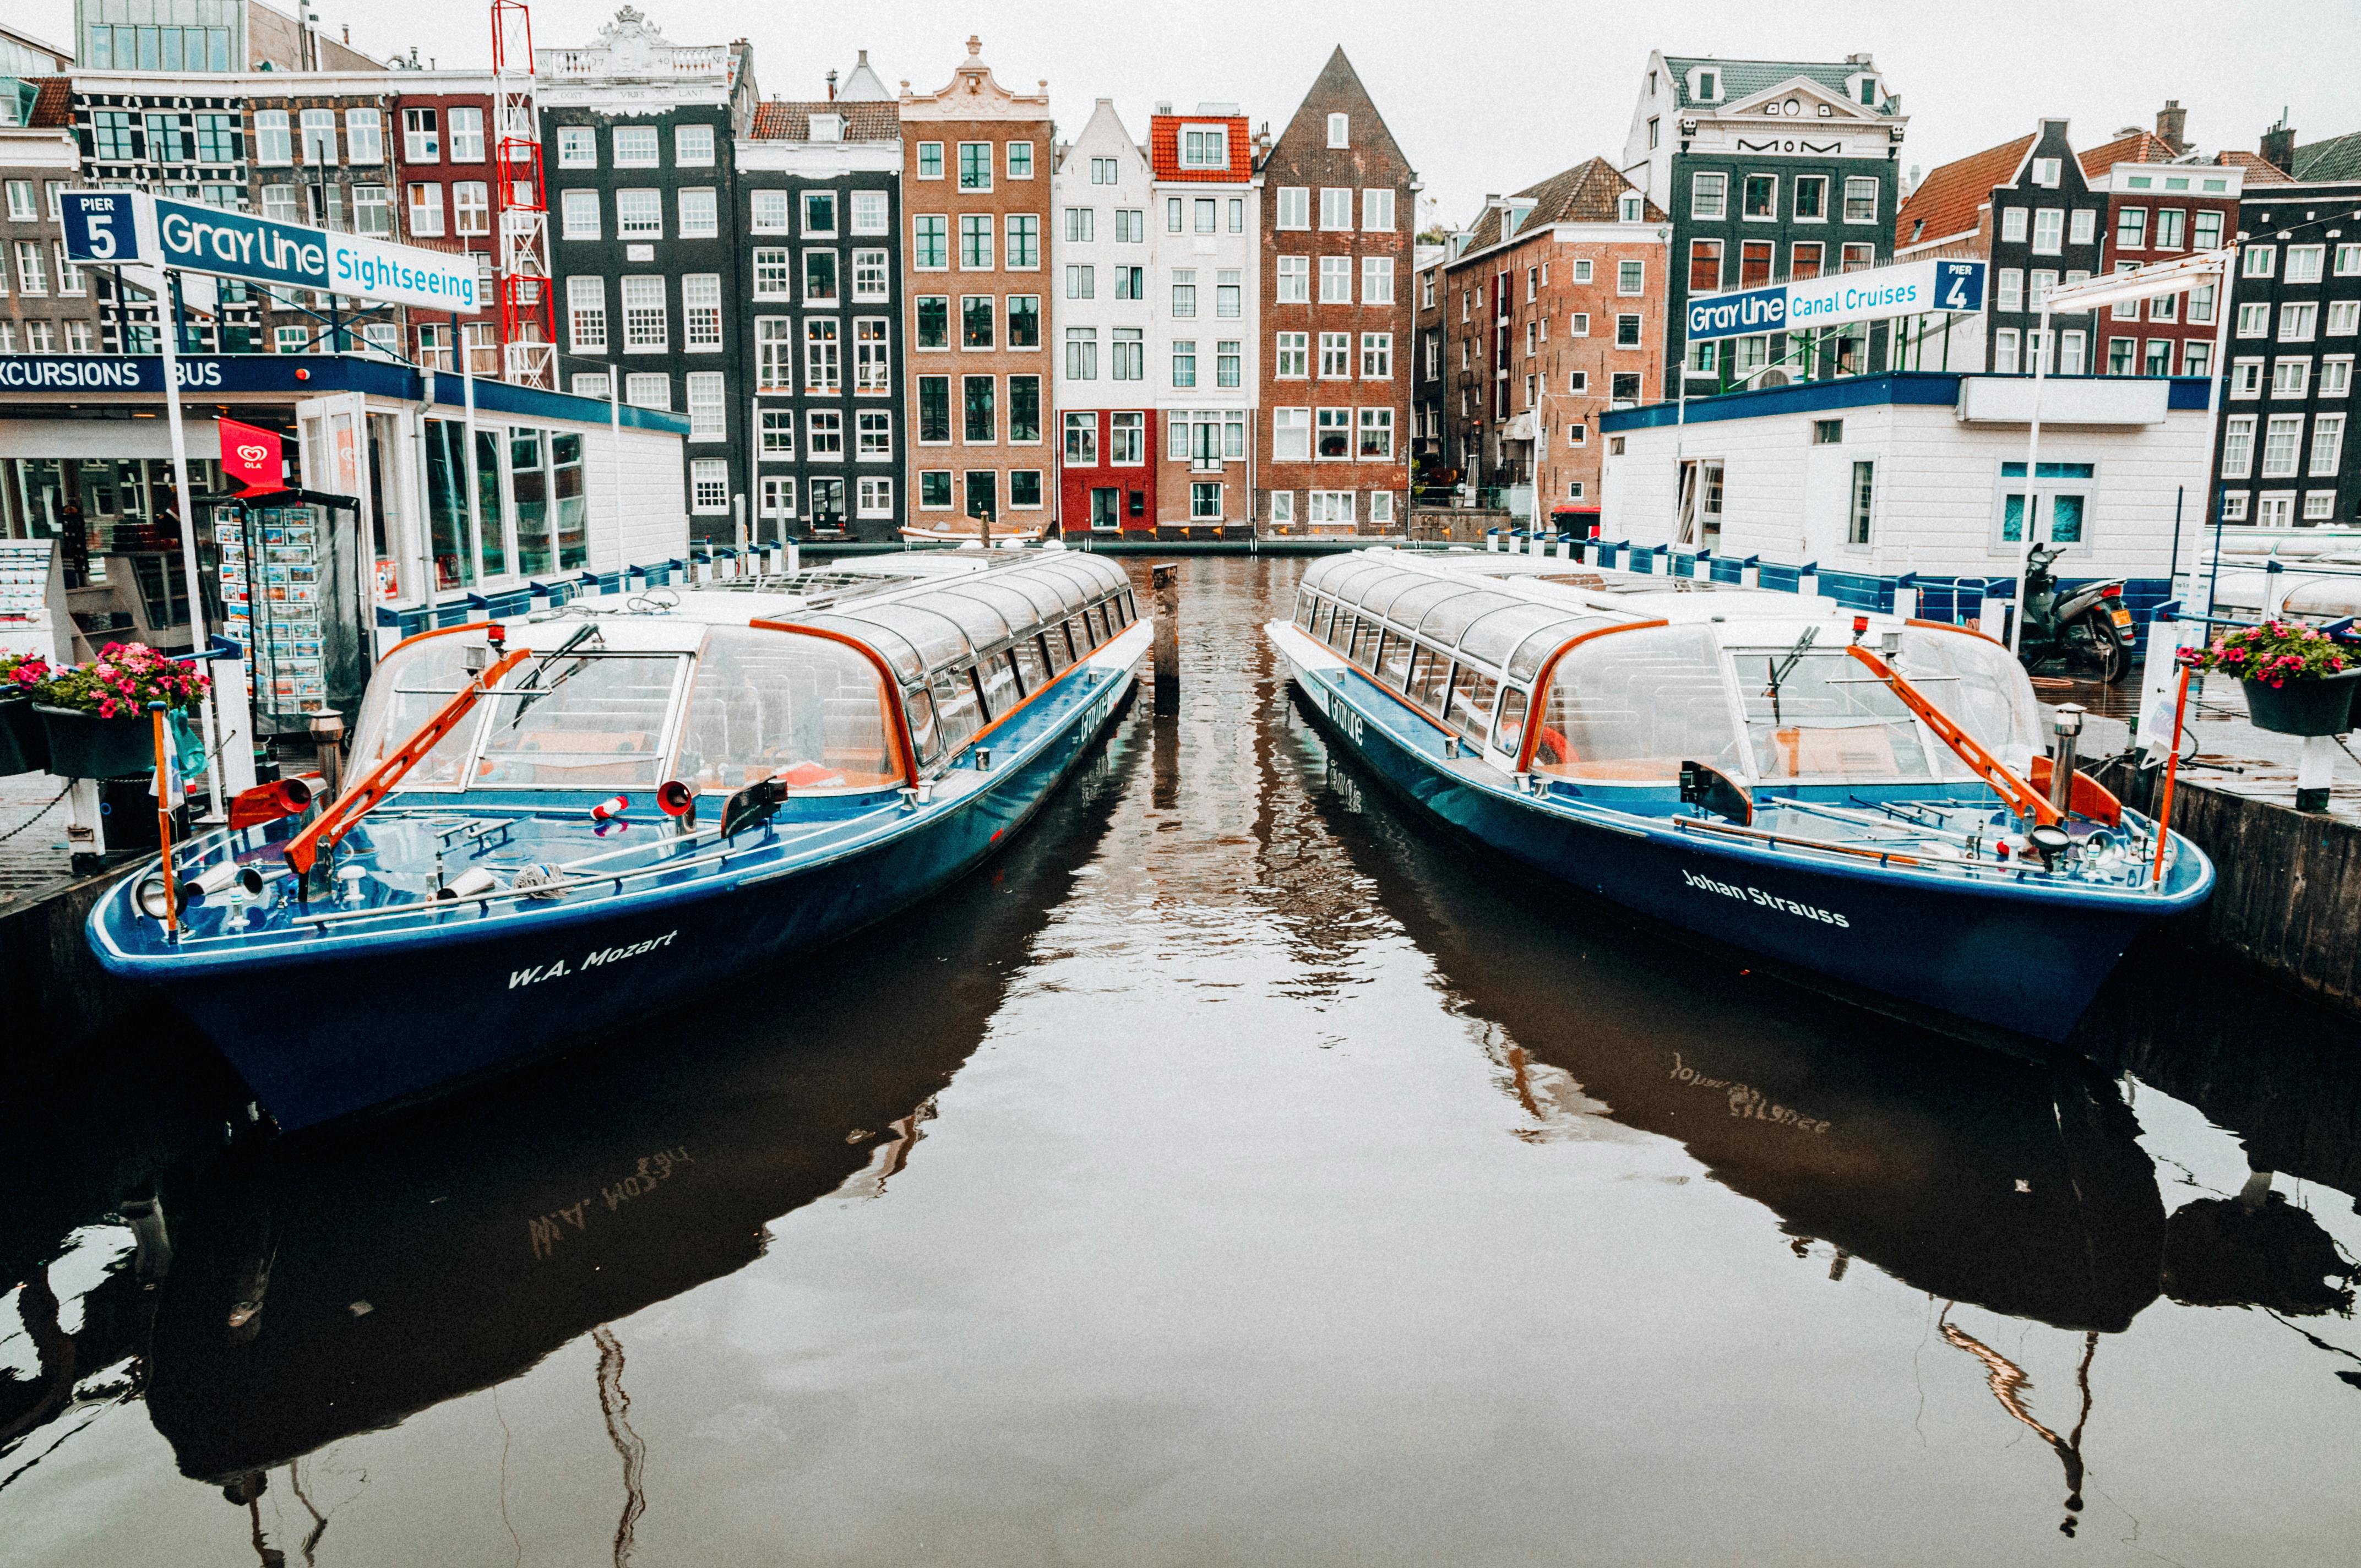 tour boats on a canal in amsterdam